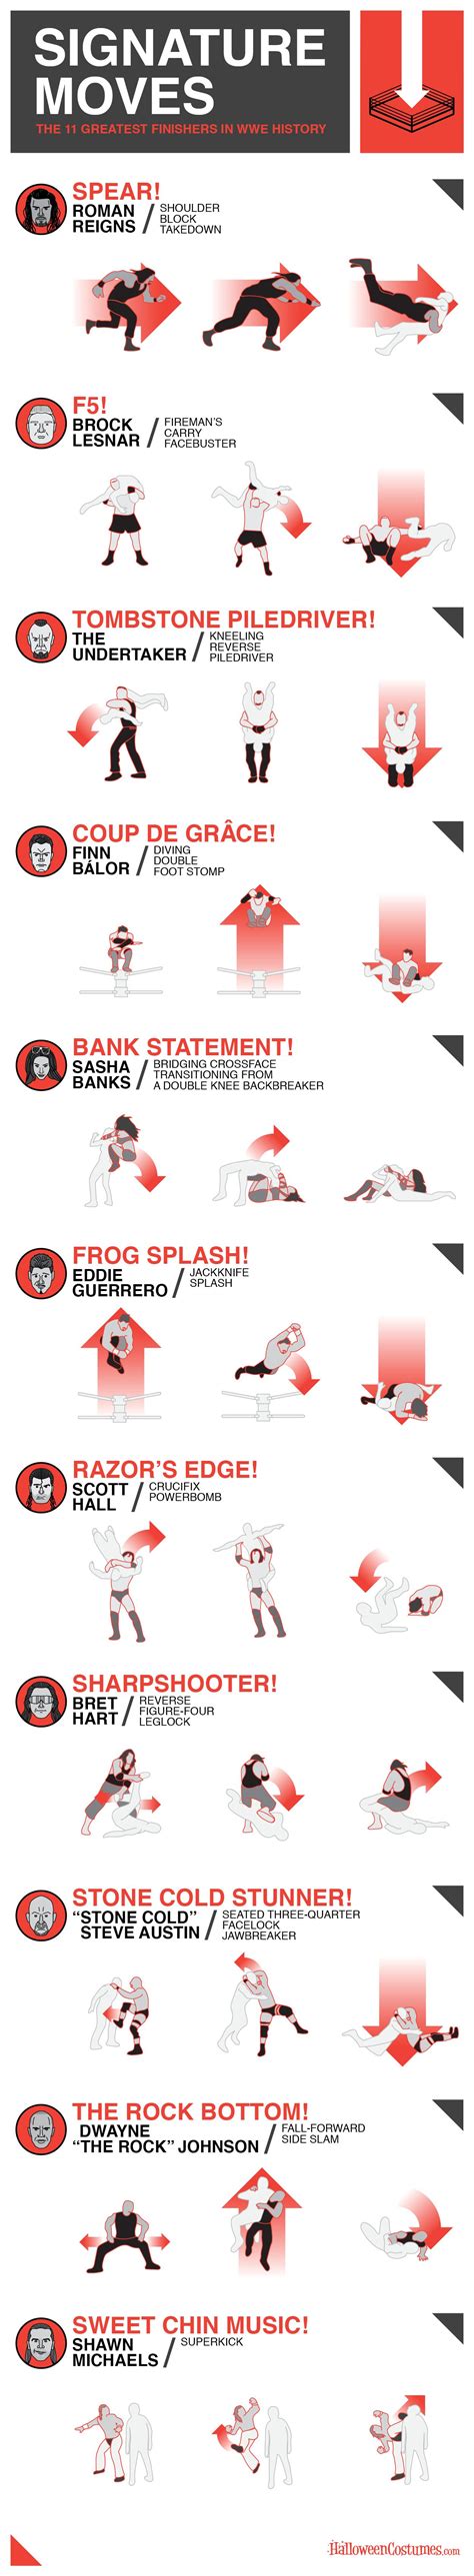 Infographic The 11 Greatest Finishers In Wwe History Signature